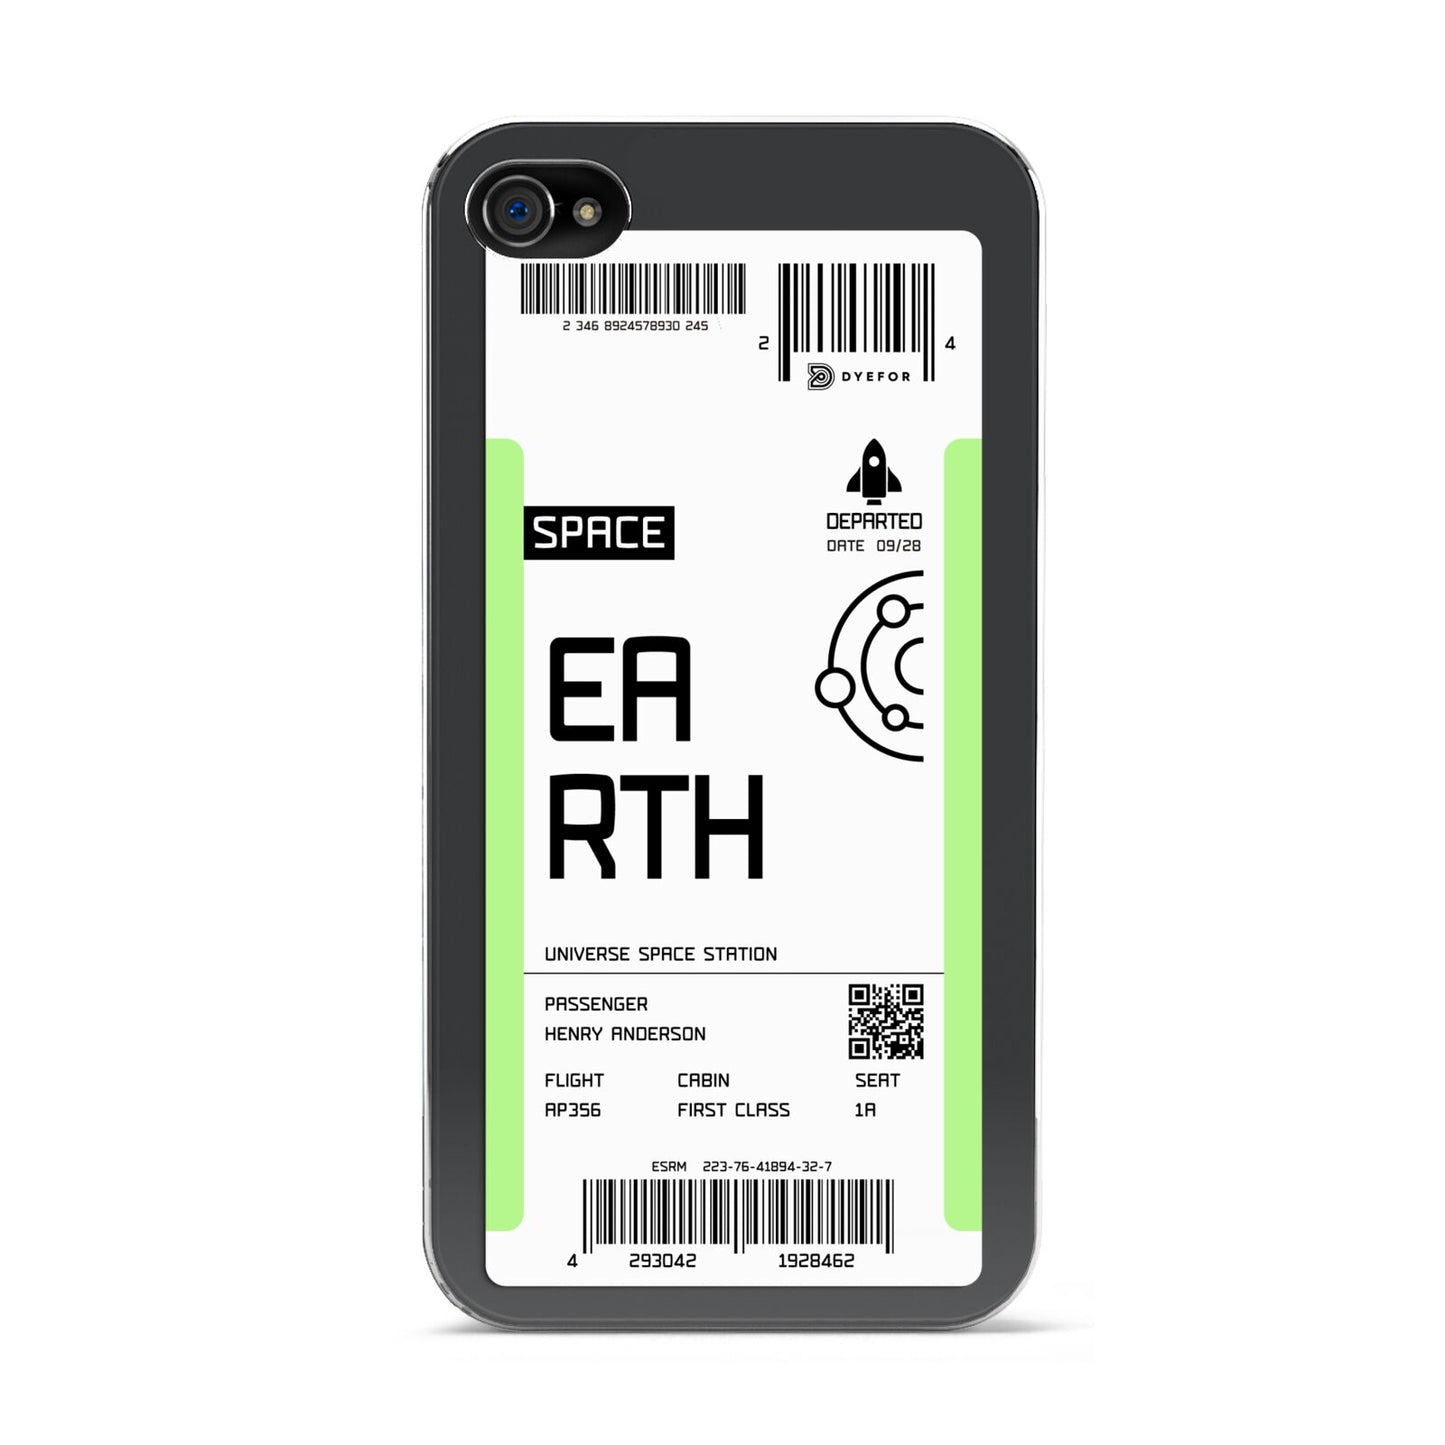 Earth Boarding Pass Apple iPhone 4s Case